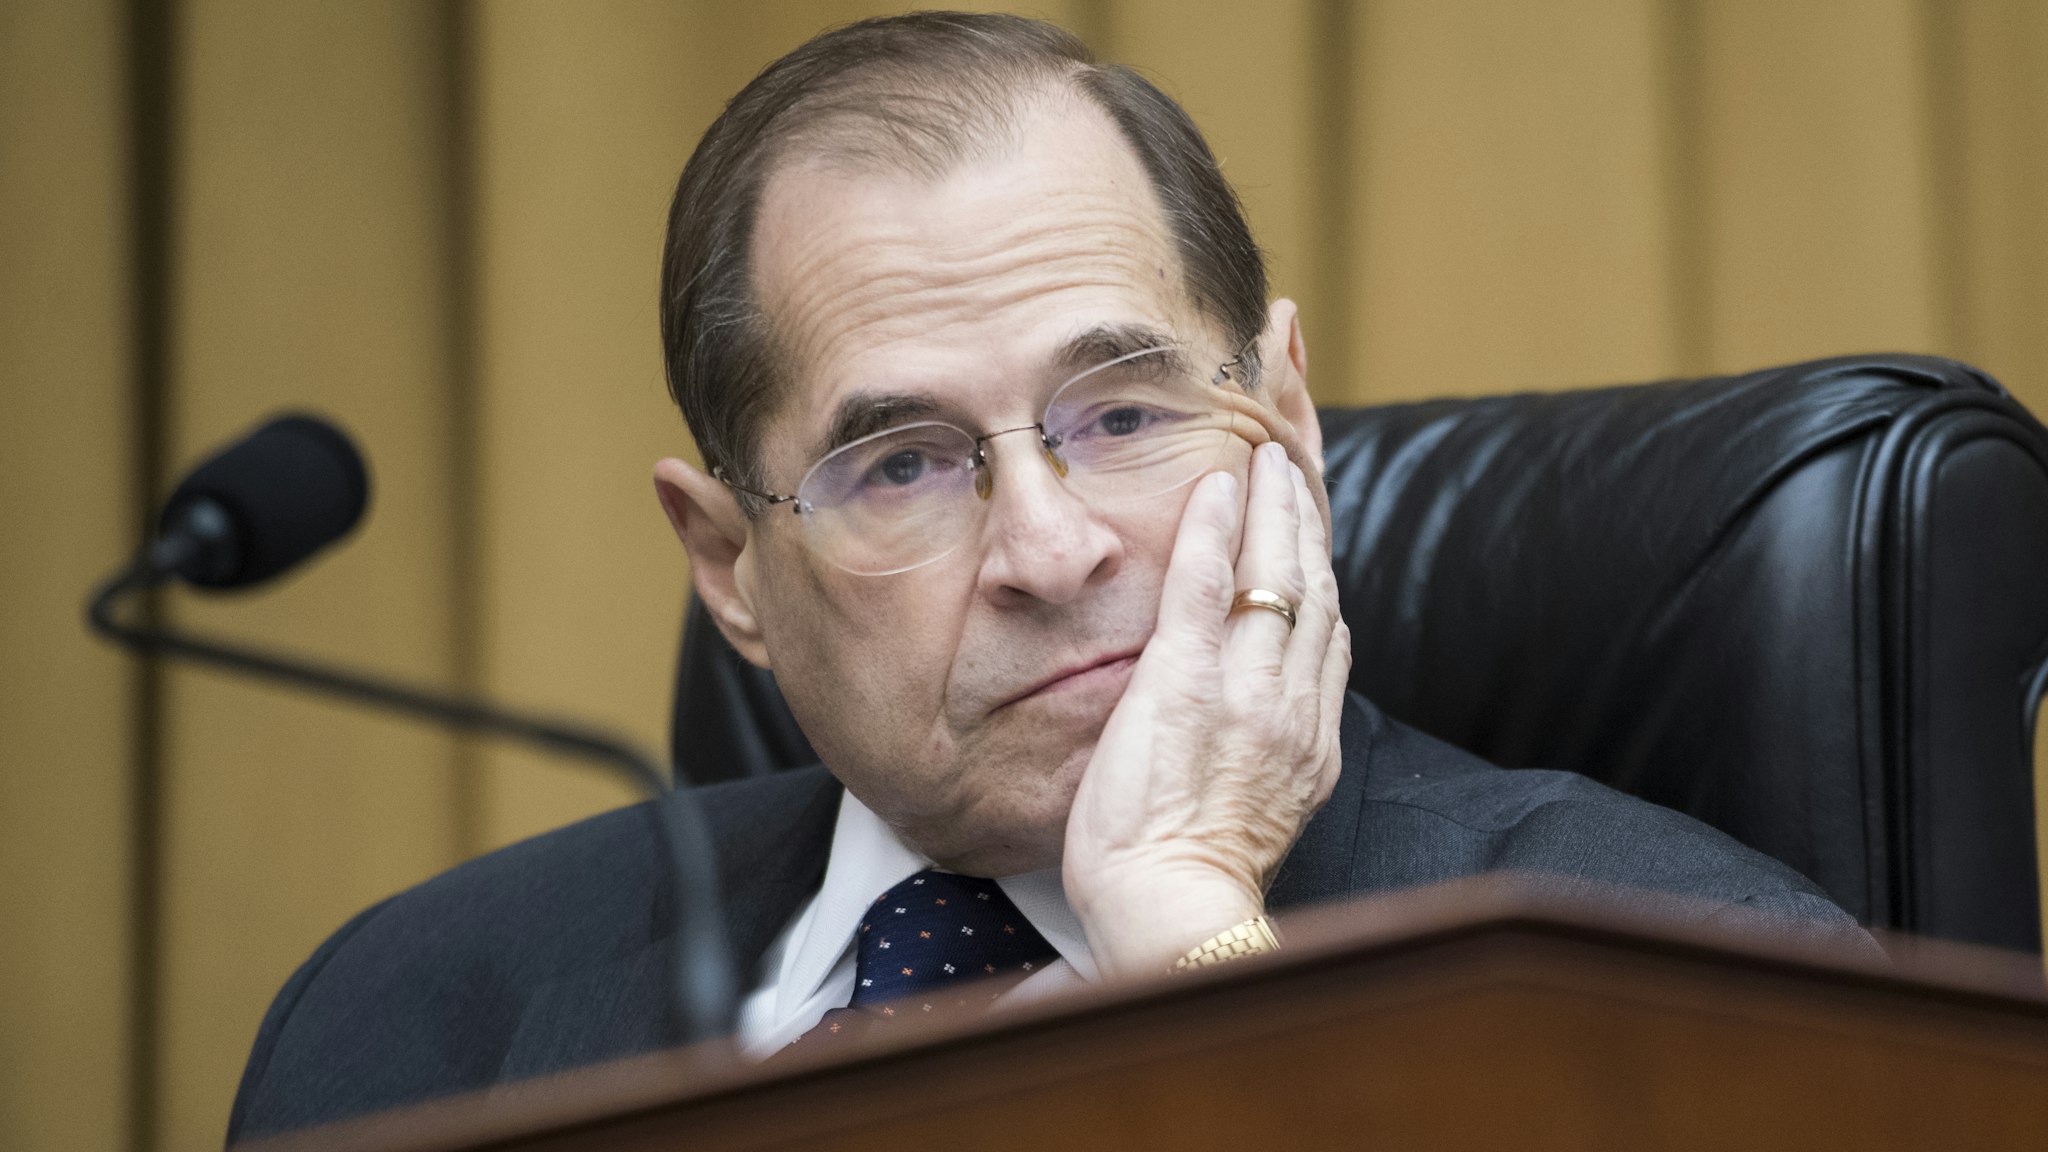 Chairman Jerrold Nadler, D-N.Y., prepares to begin a House Judiciary Committee hearing in Rayburn Building that was scheduled to feature testimony by Attorney General William Barr on Russian Interference in the 2016 election and the Robert Mueller report on Thursday, May 2, 2019. Barr did not show up for the hearing citing displeasure with the format.